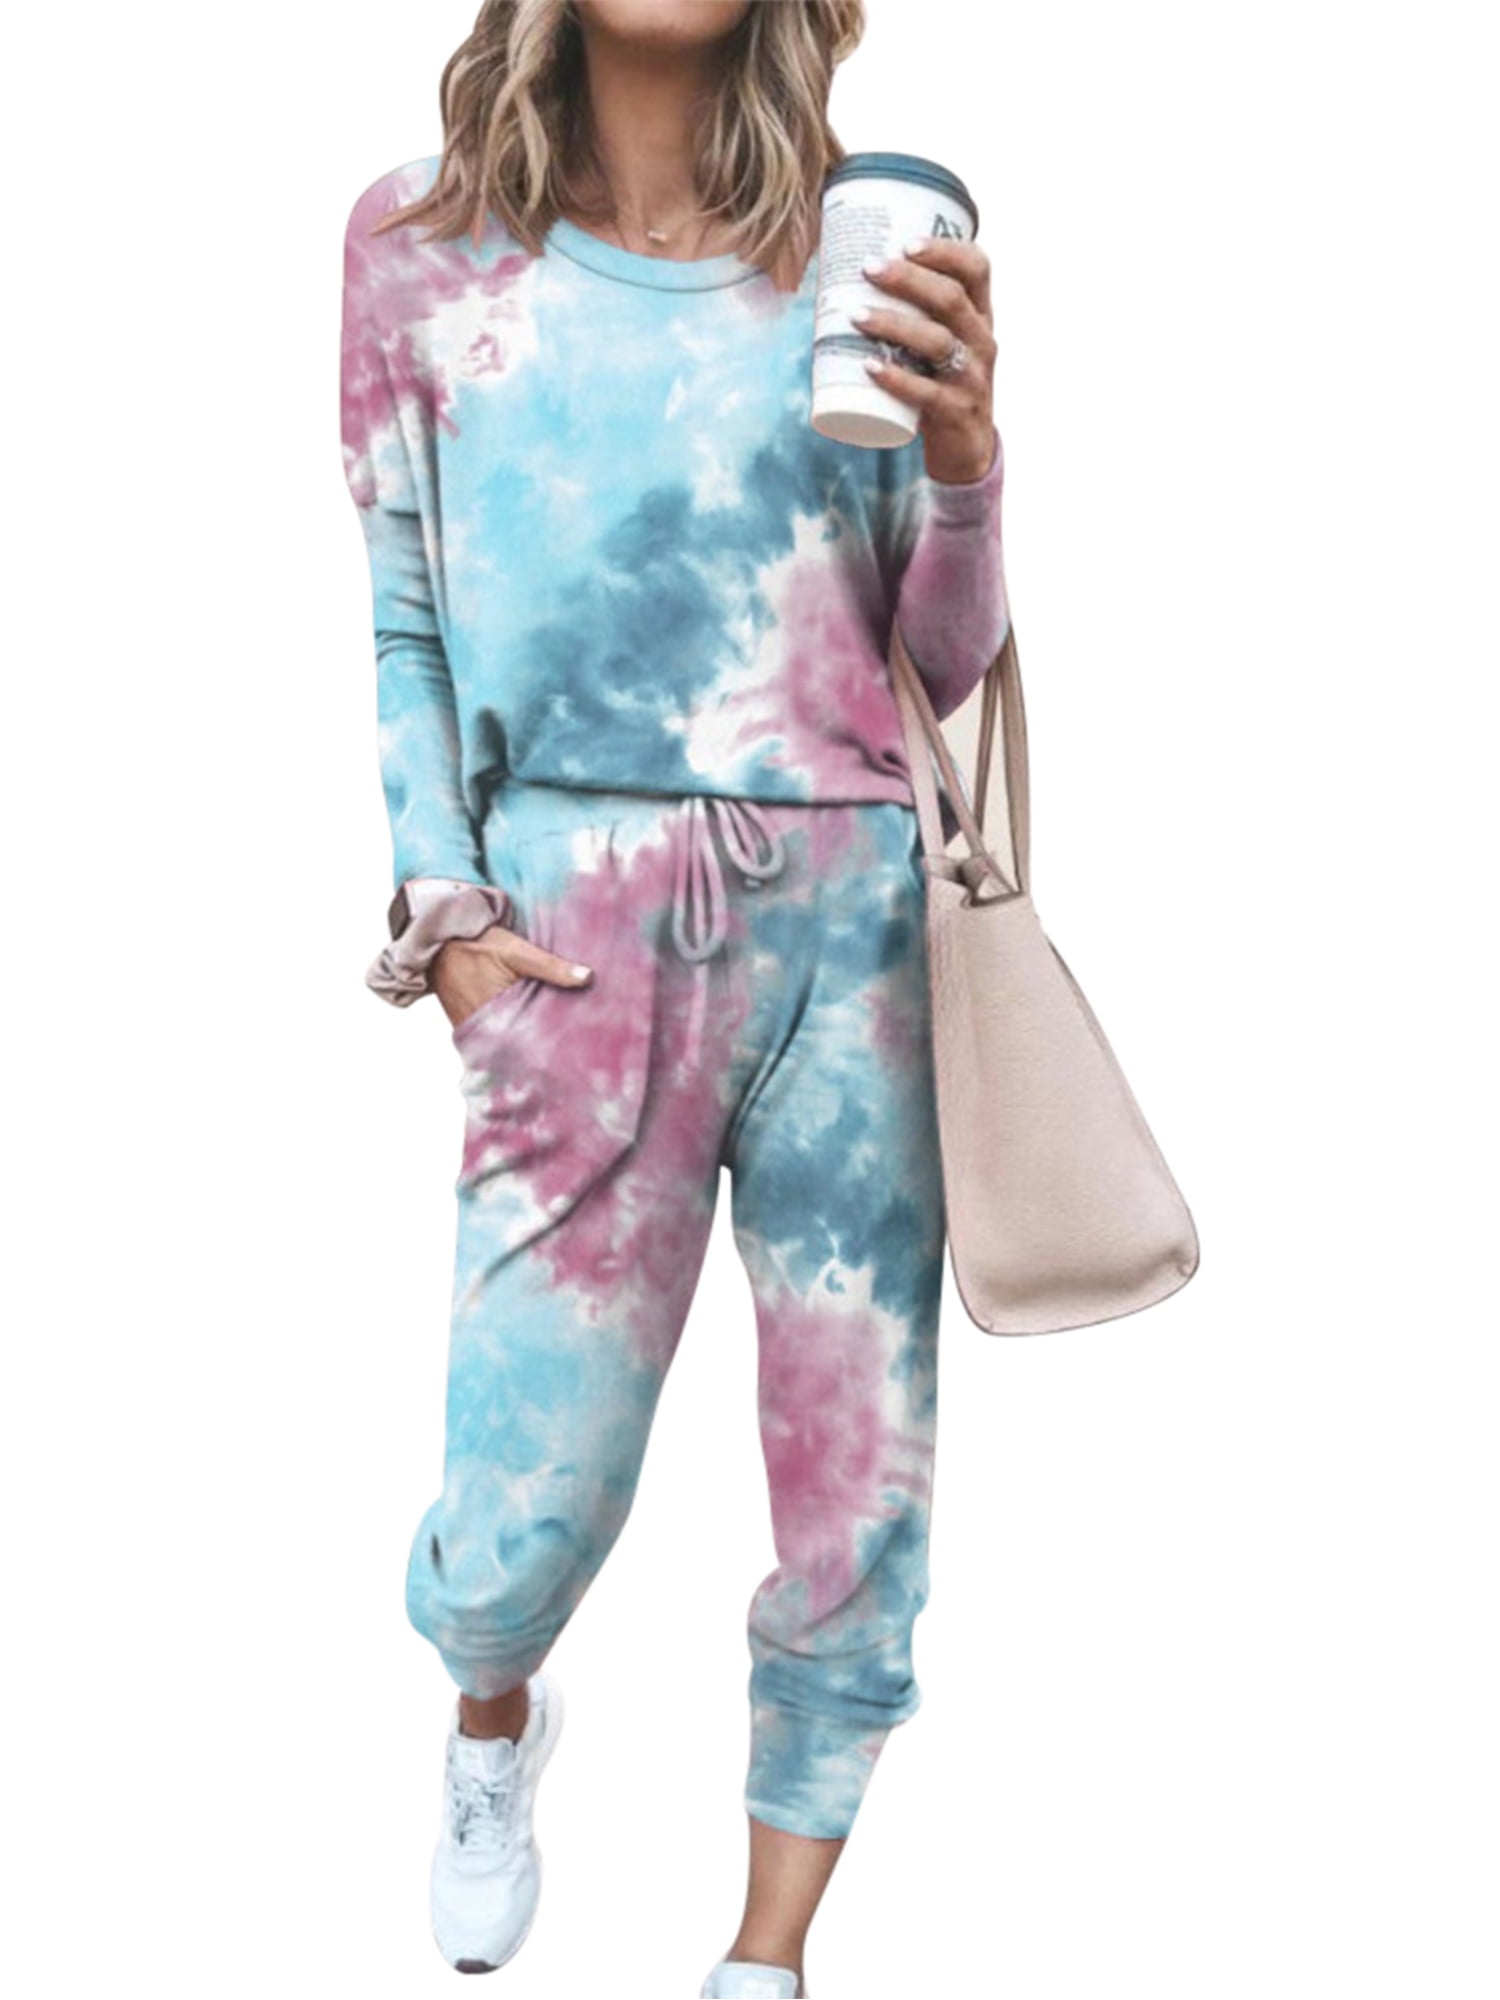 Womens 2 Pcs Outfit Joggers Sets Loungewear Sweatsuit Long Sleeve Pullover and Drawstring Sweatpants Pjs Tracksuits 